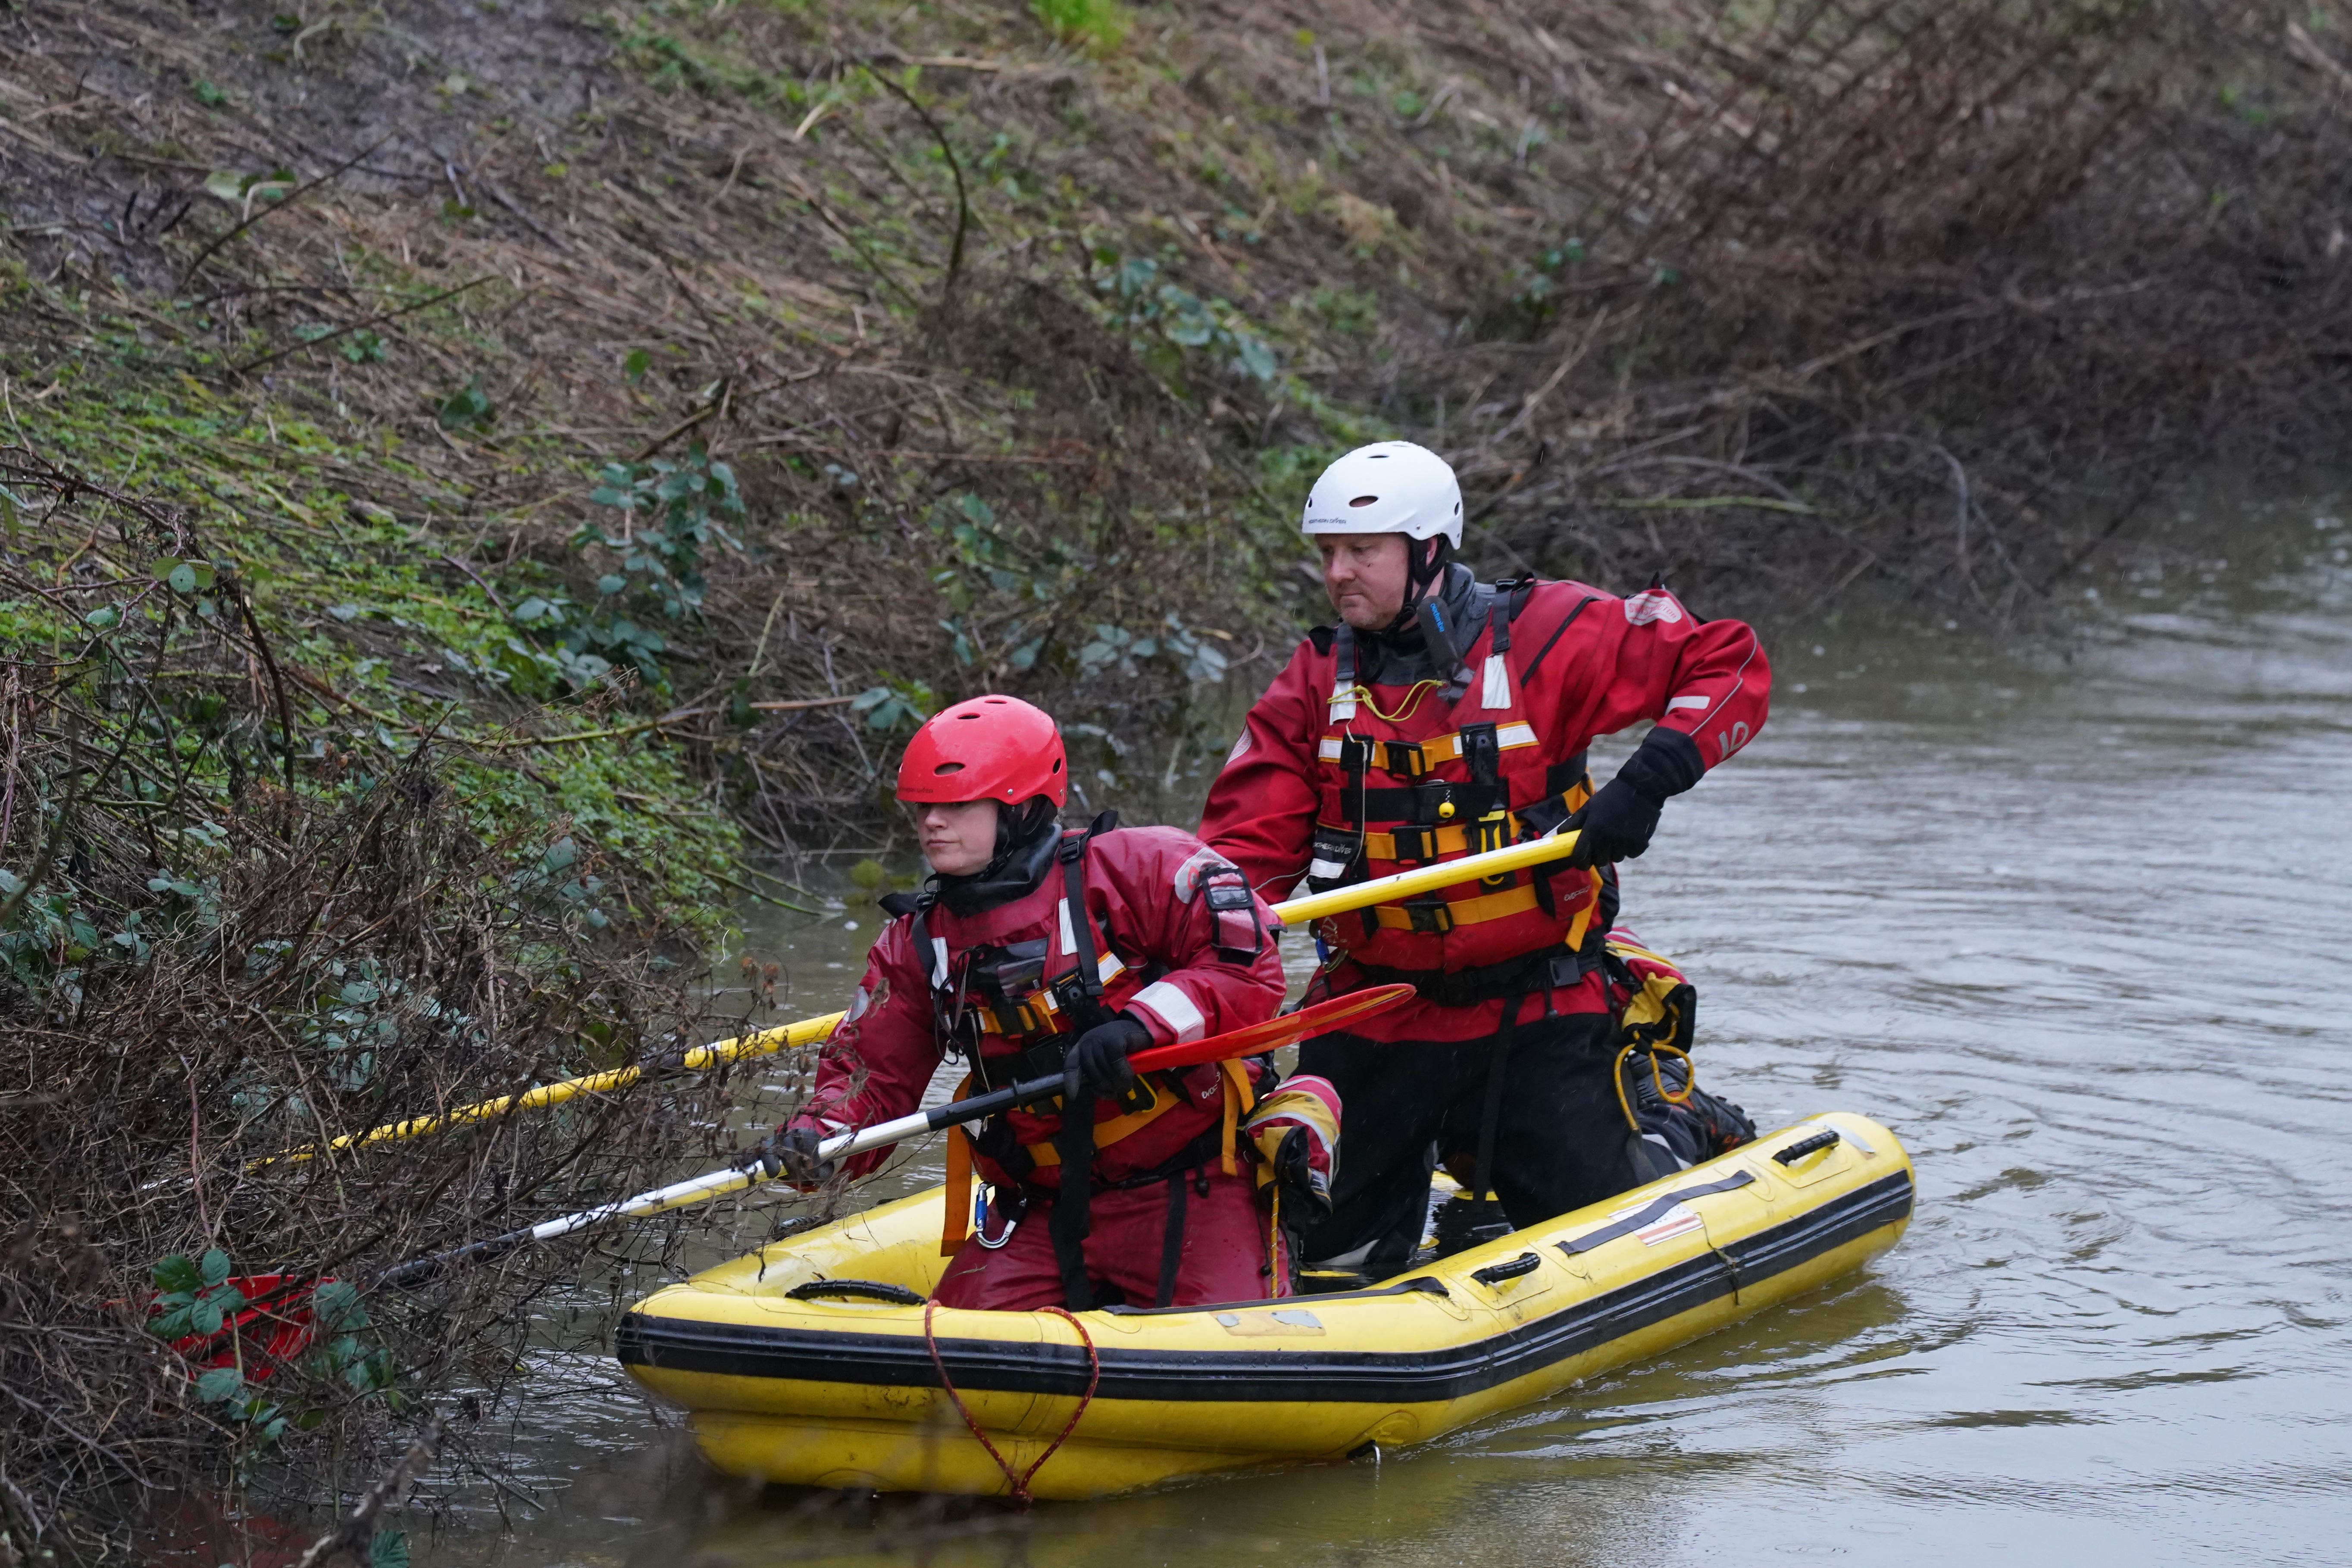 The boy was with family members when he fell into the fast-flowing river in Leicestershire on Sunday